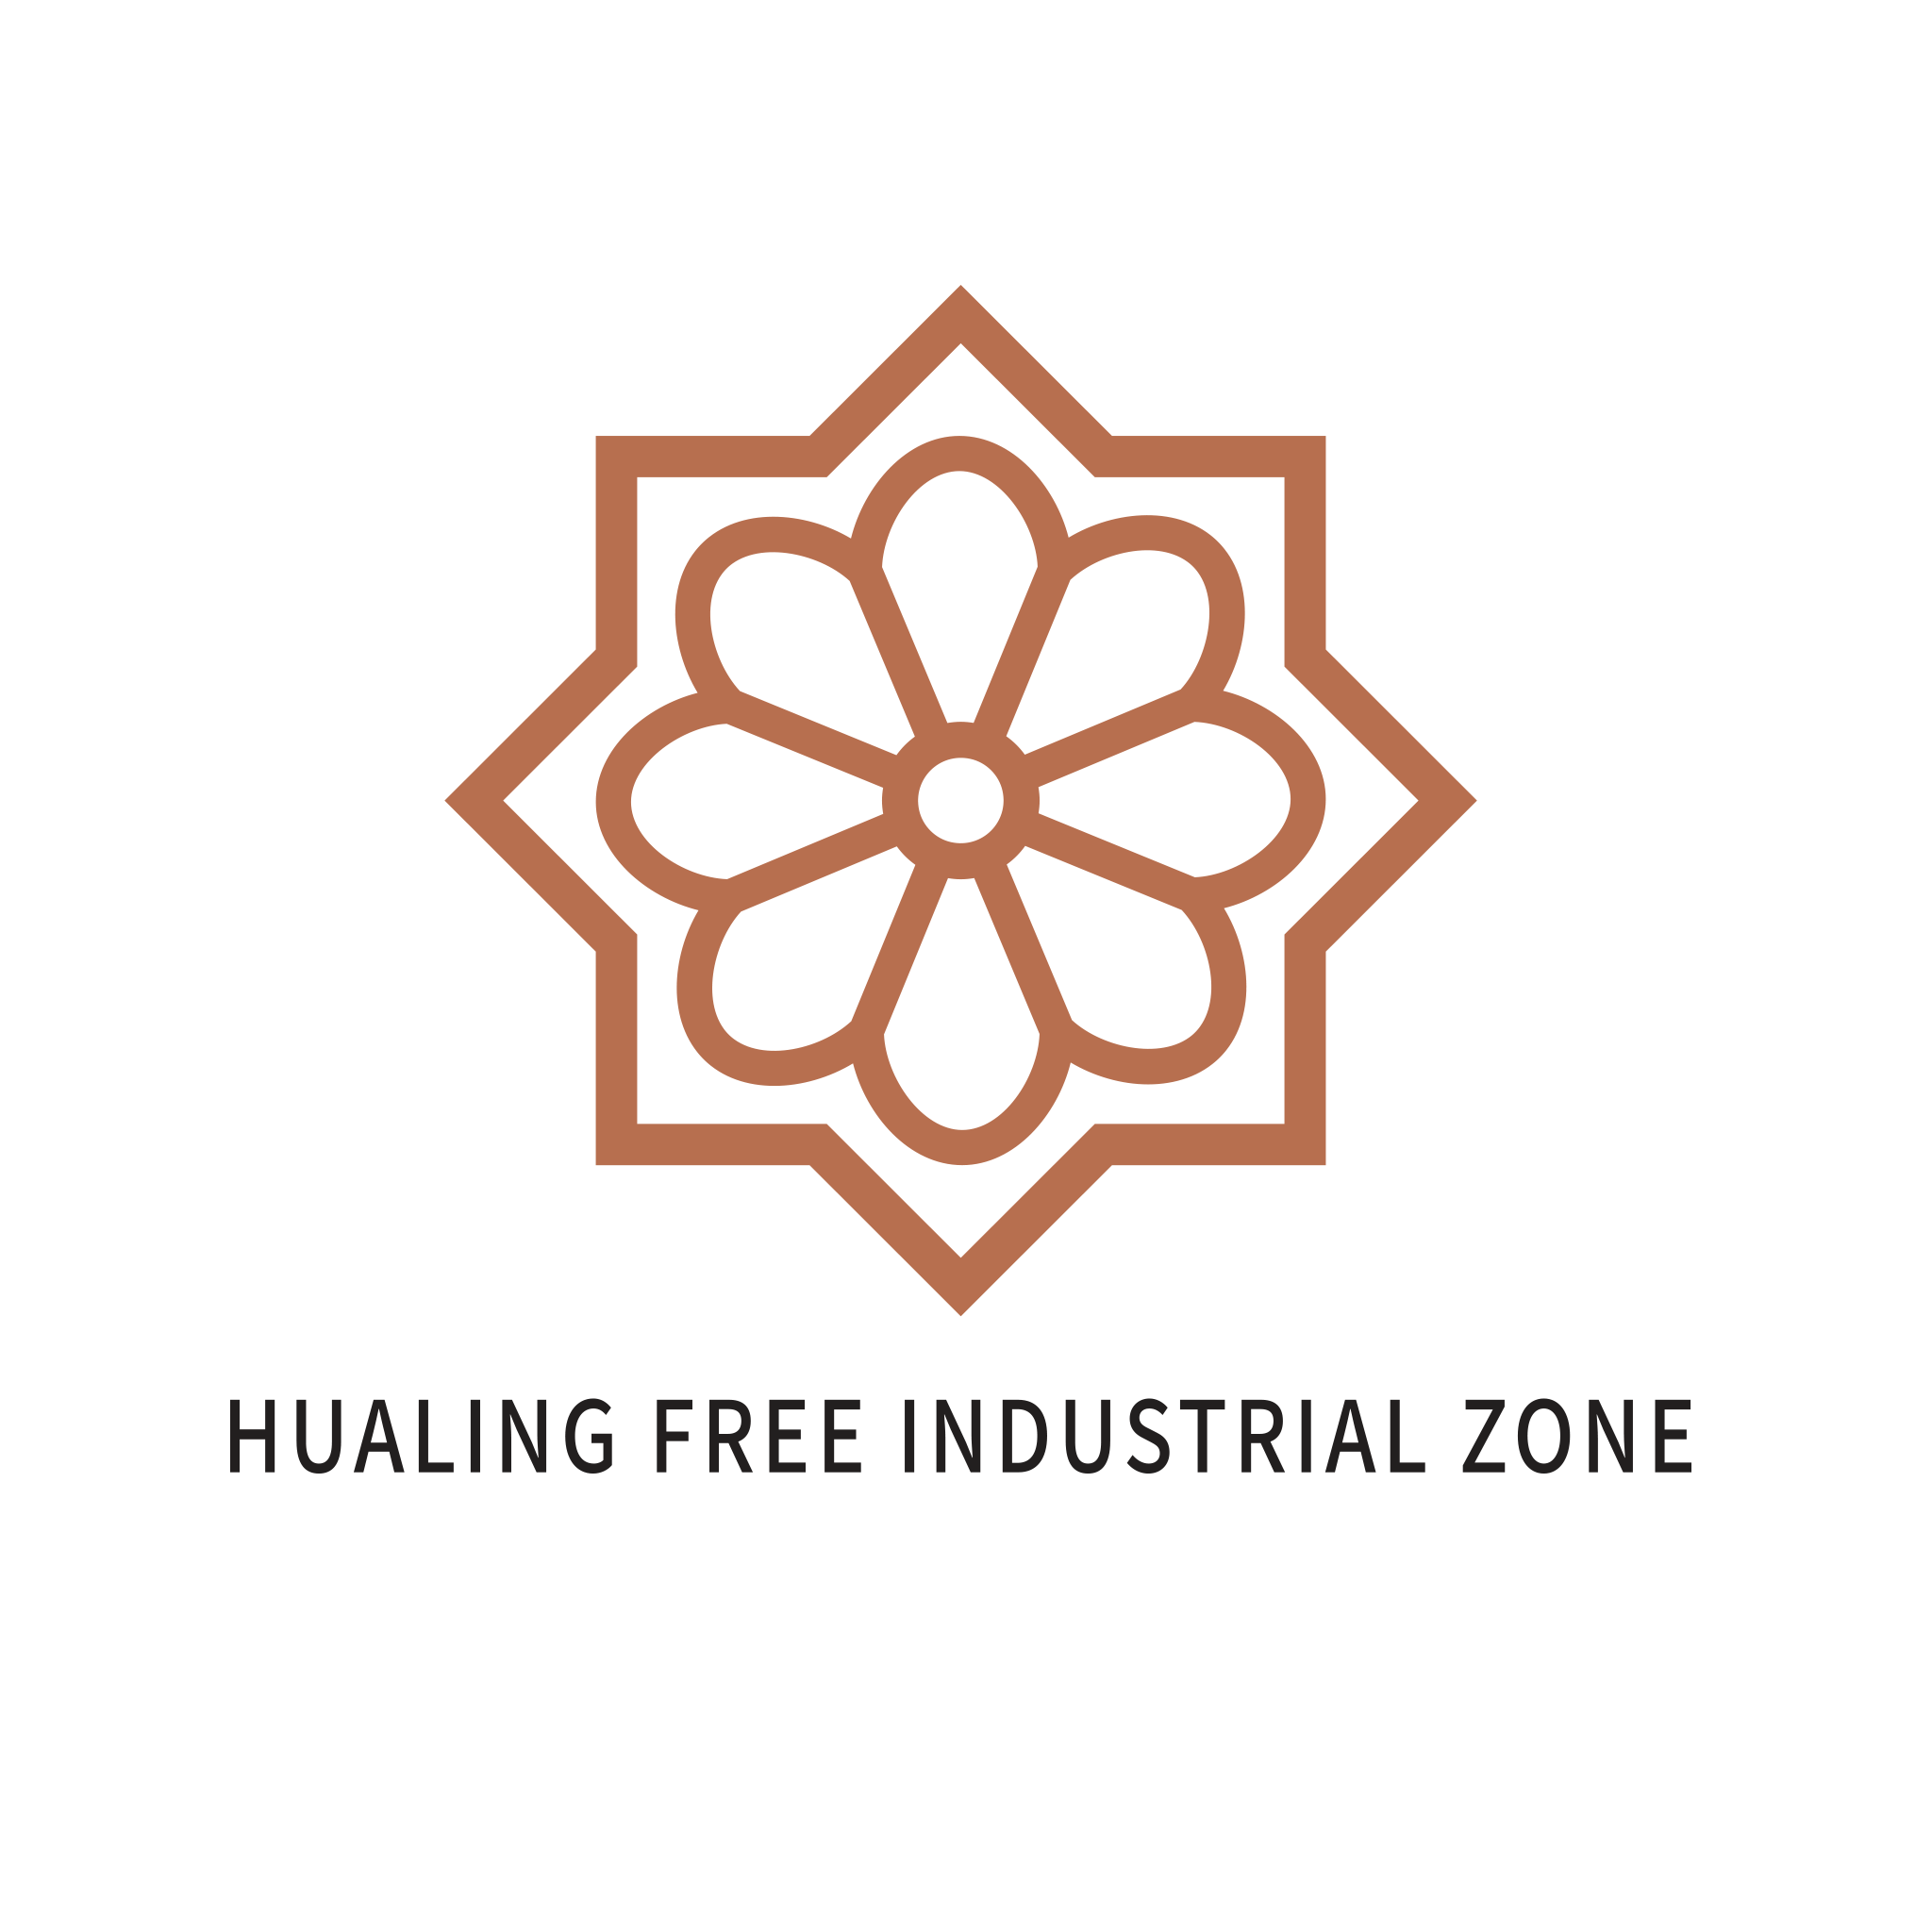 Hualing Free Industrial Zone